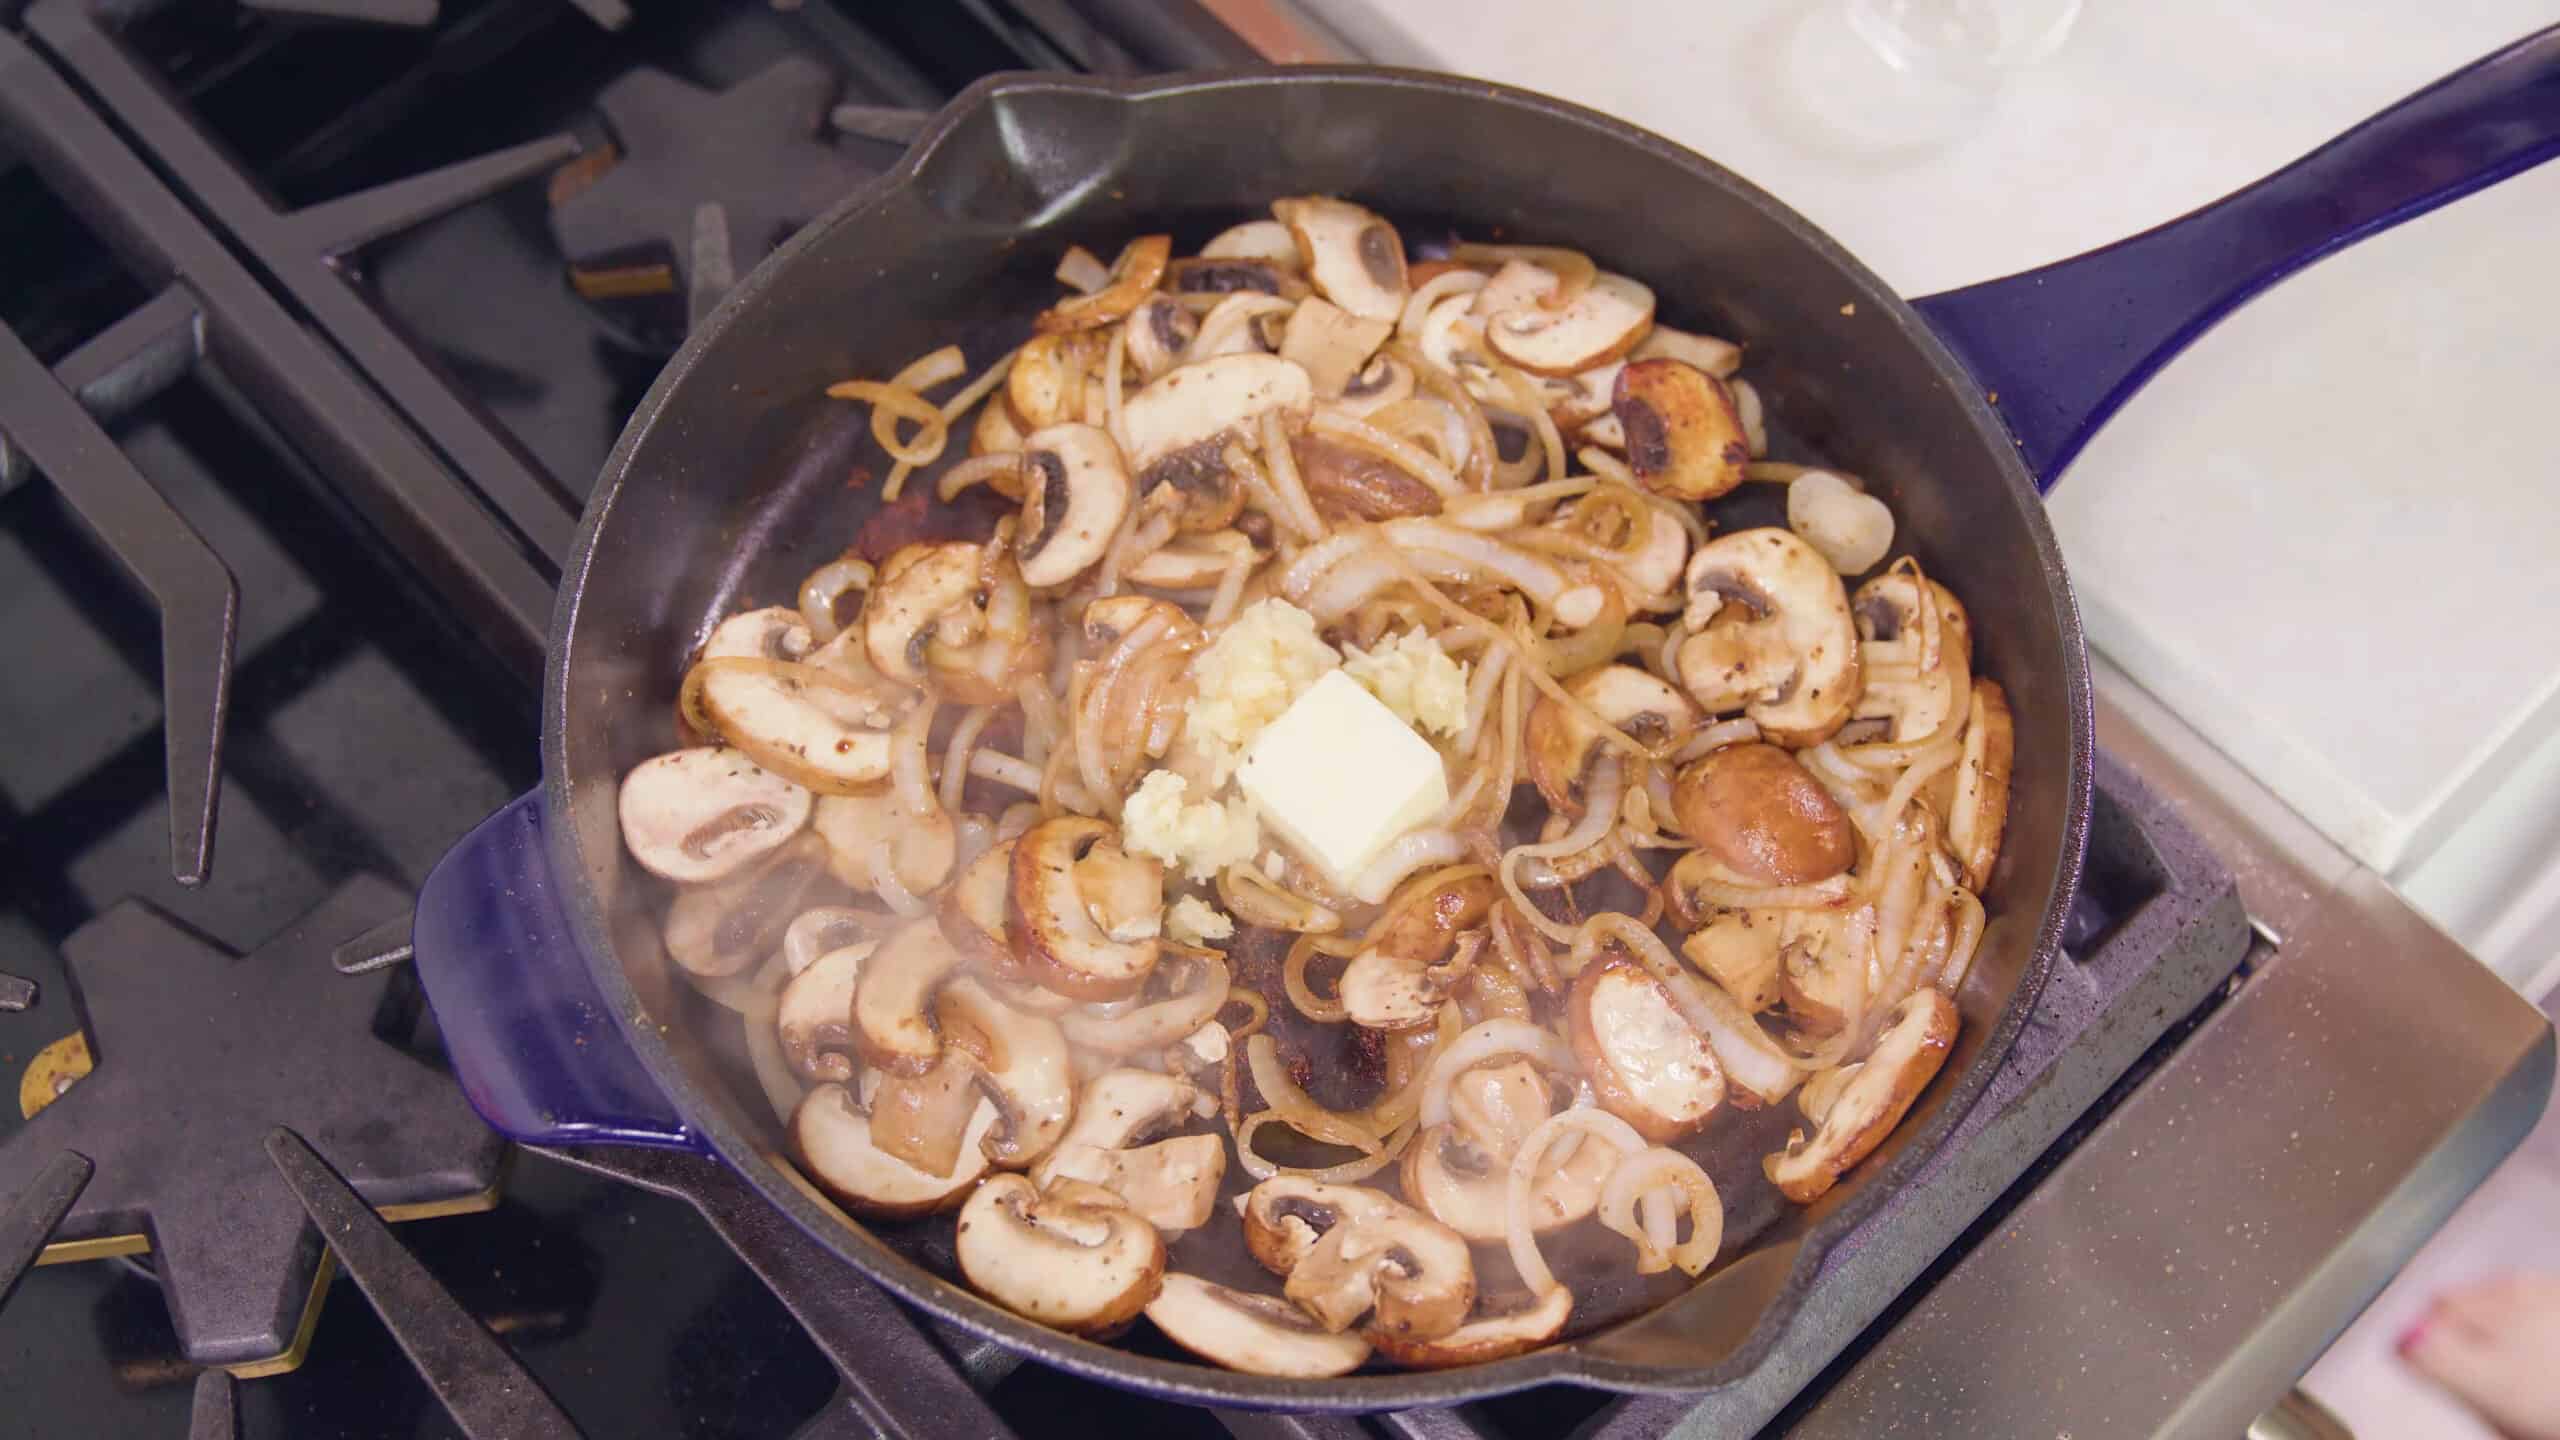 Overhead view of blue enamel cast iron skillet with sautéed mushrooms and onions with minced garlic and a pad of butter beginning to melt in the middle.